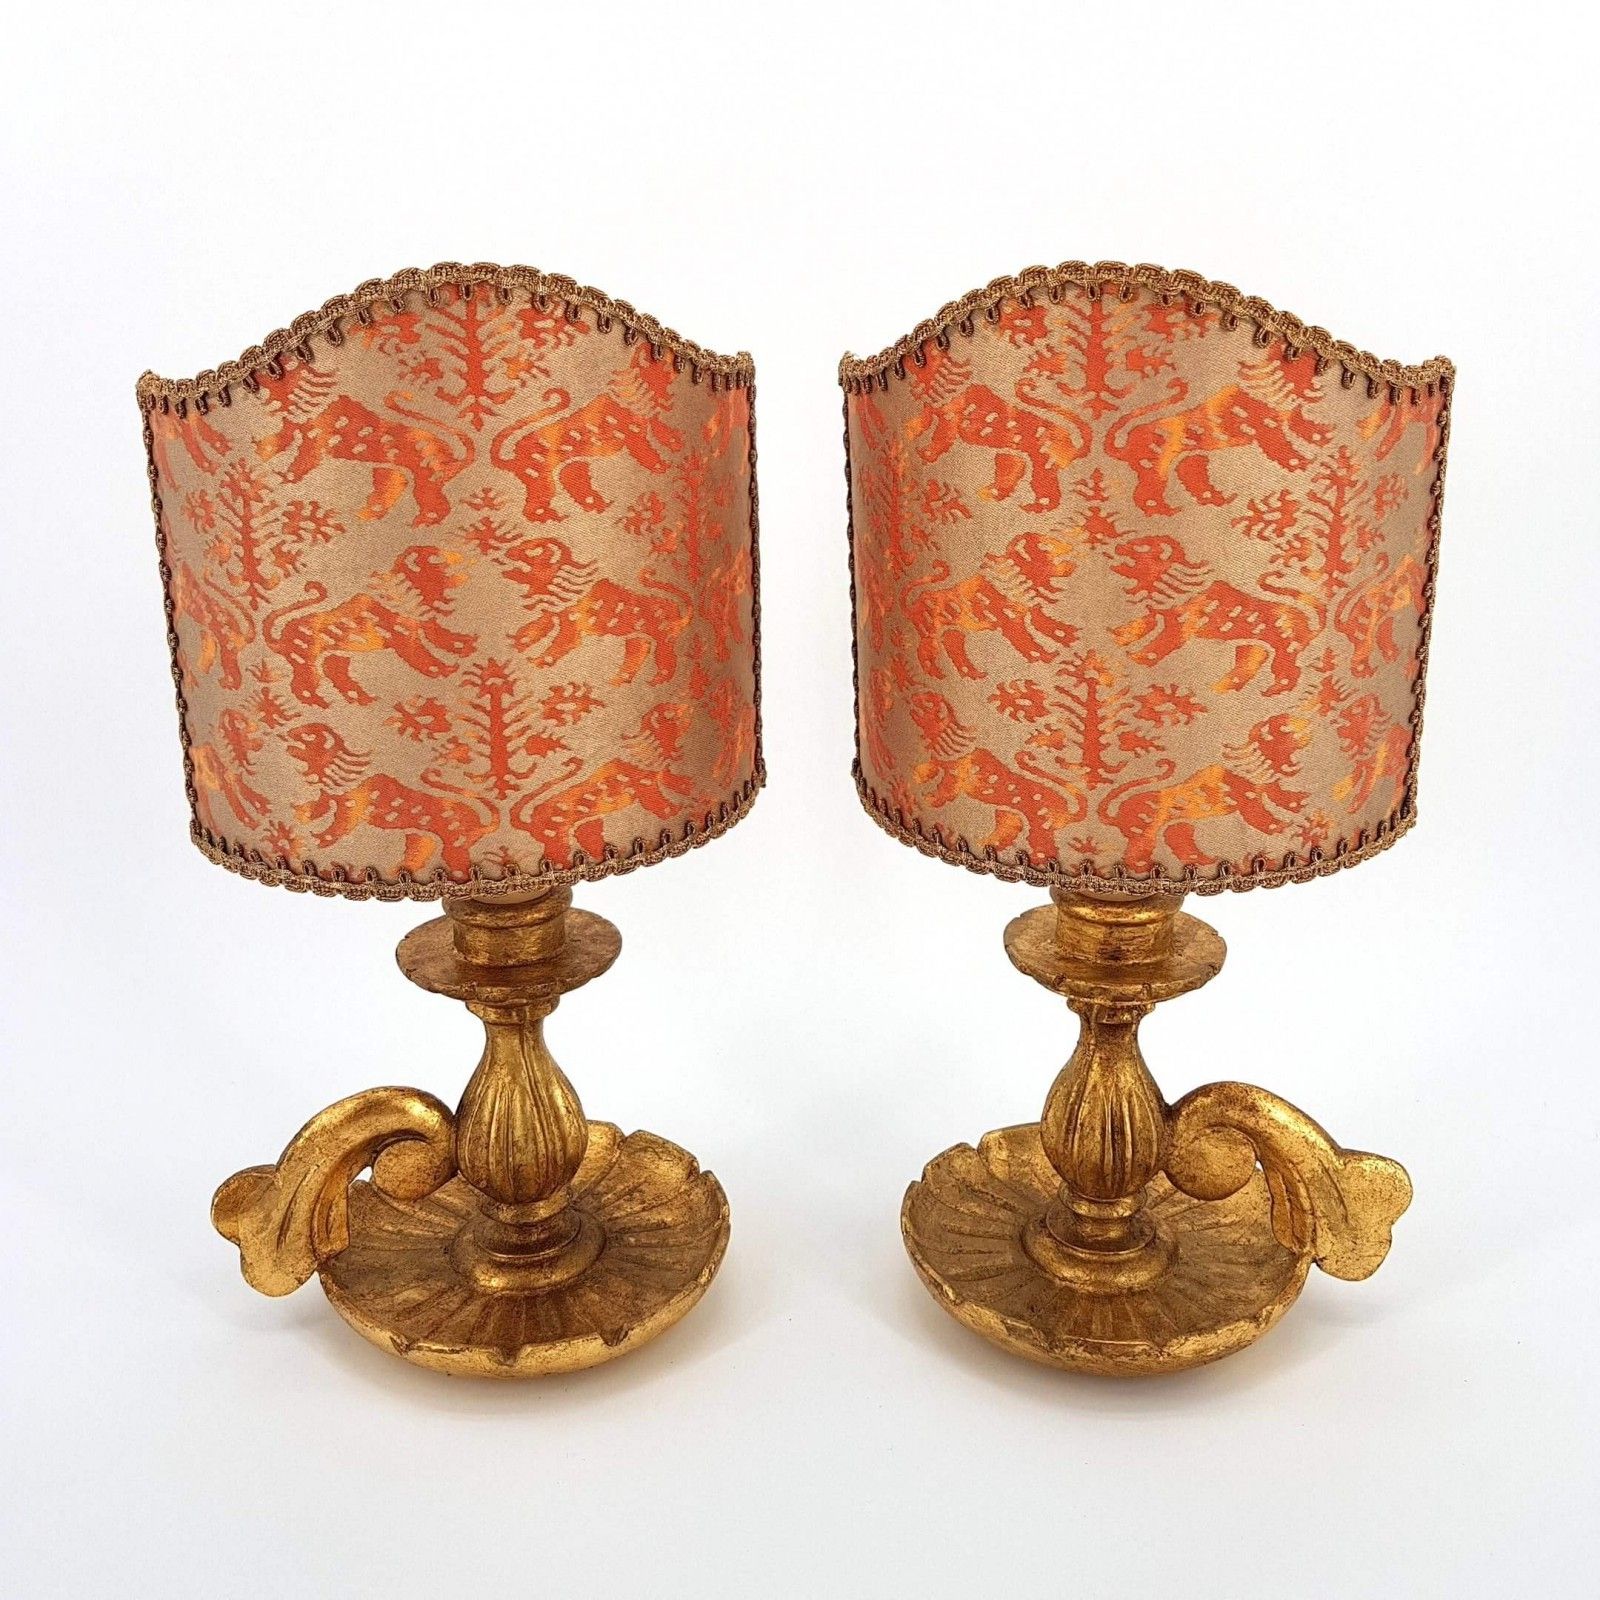 Pair Of Antique Italian Gilt Carved Wood Candlestick Table Lamps With Regard To Carved Pattern Floor Lamps (View 14 of 20)